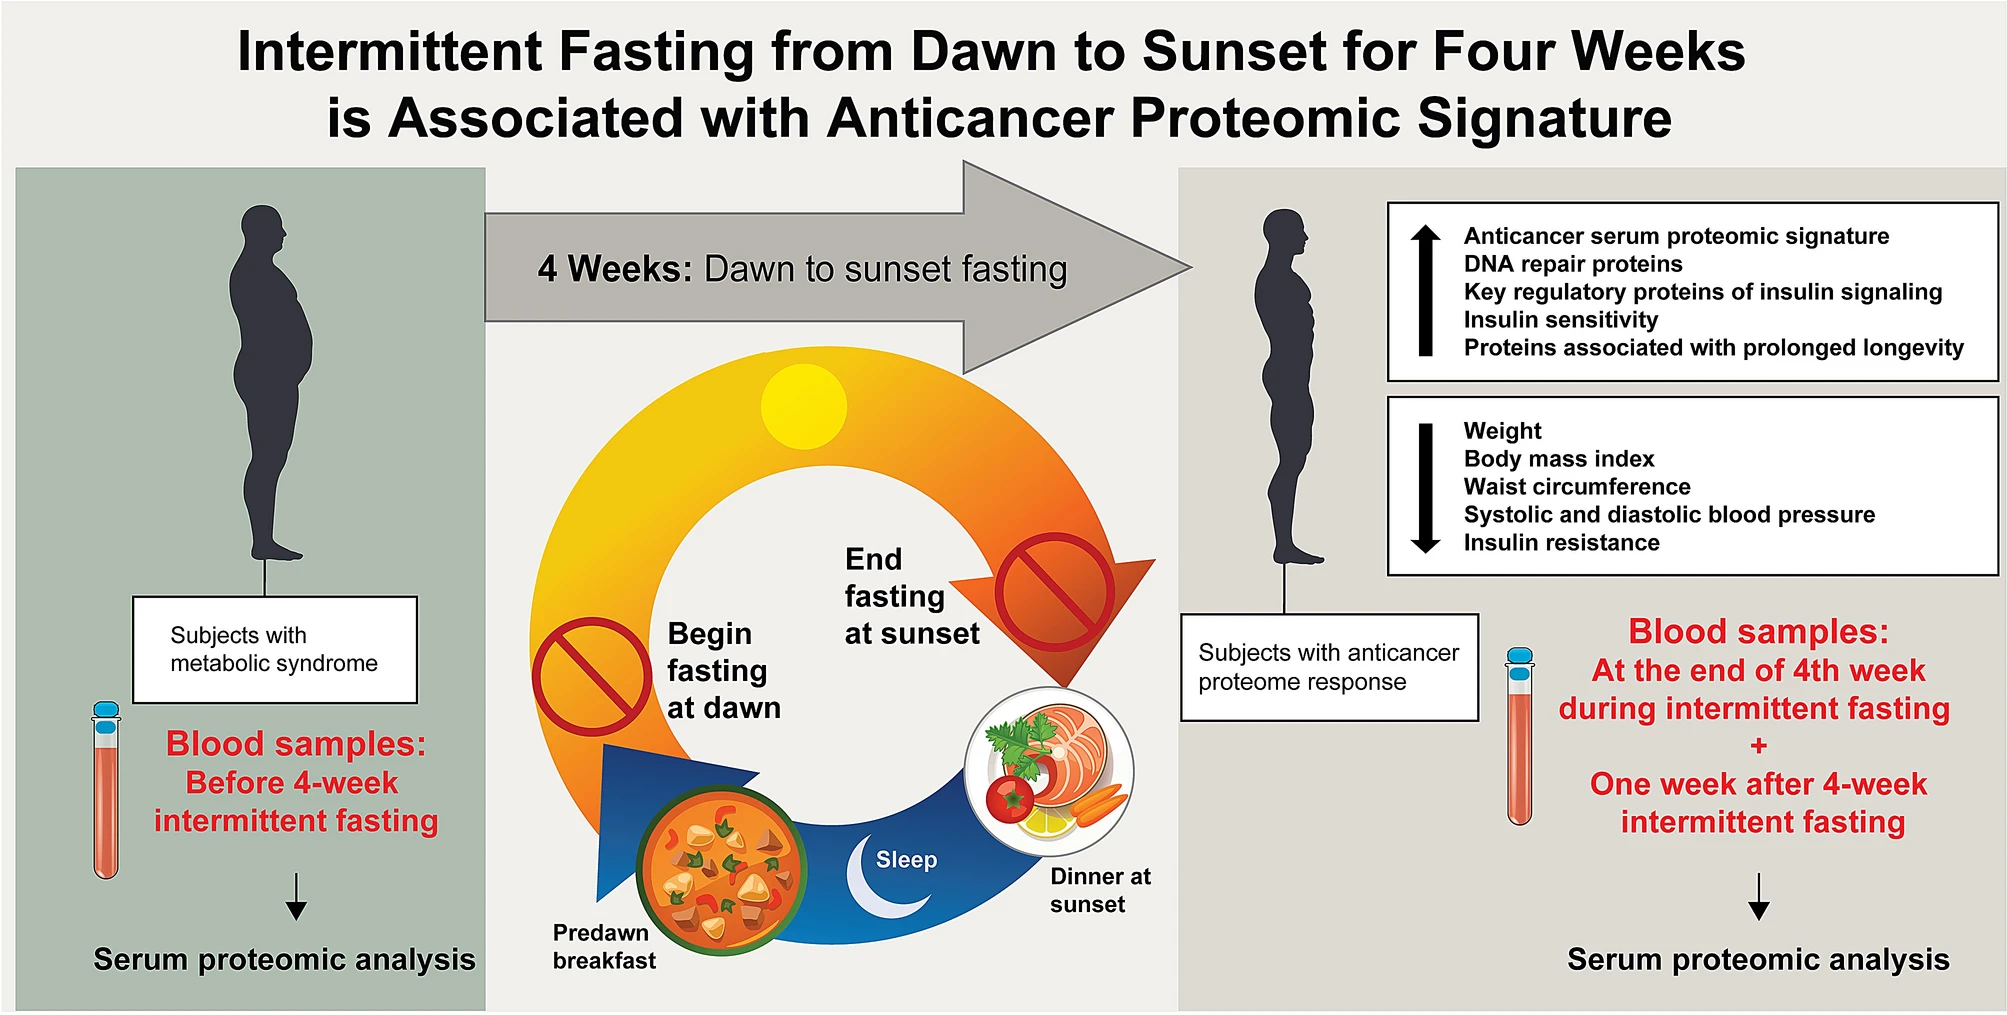 Intermittent fasting from dawn to sunset for four consecutive weeks induces anticancer serum proteome response and improves metabolic syndrome